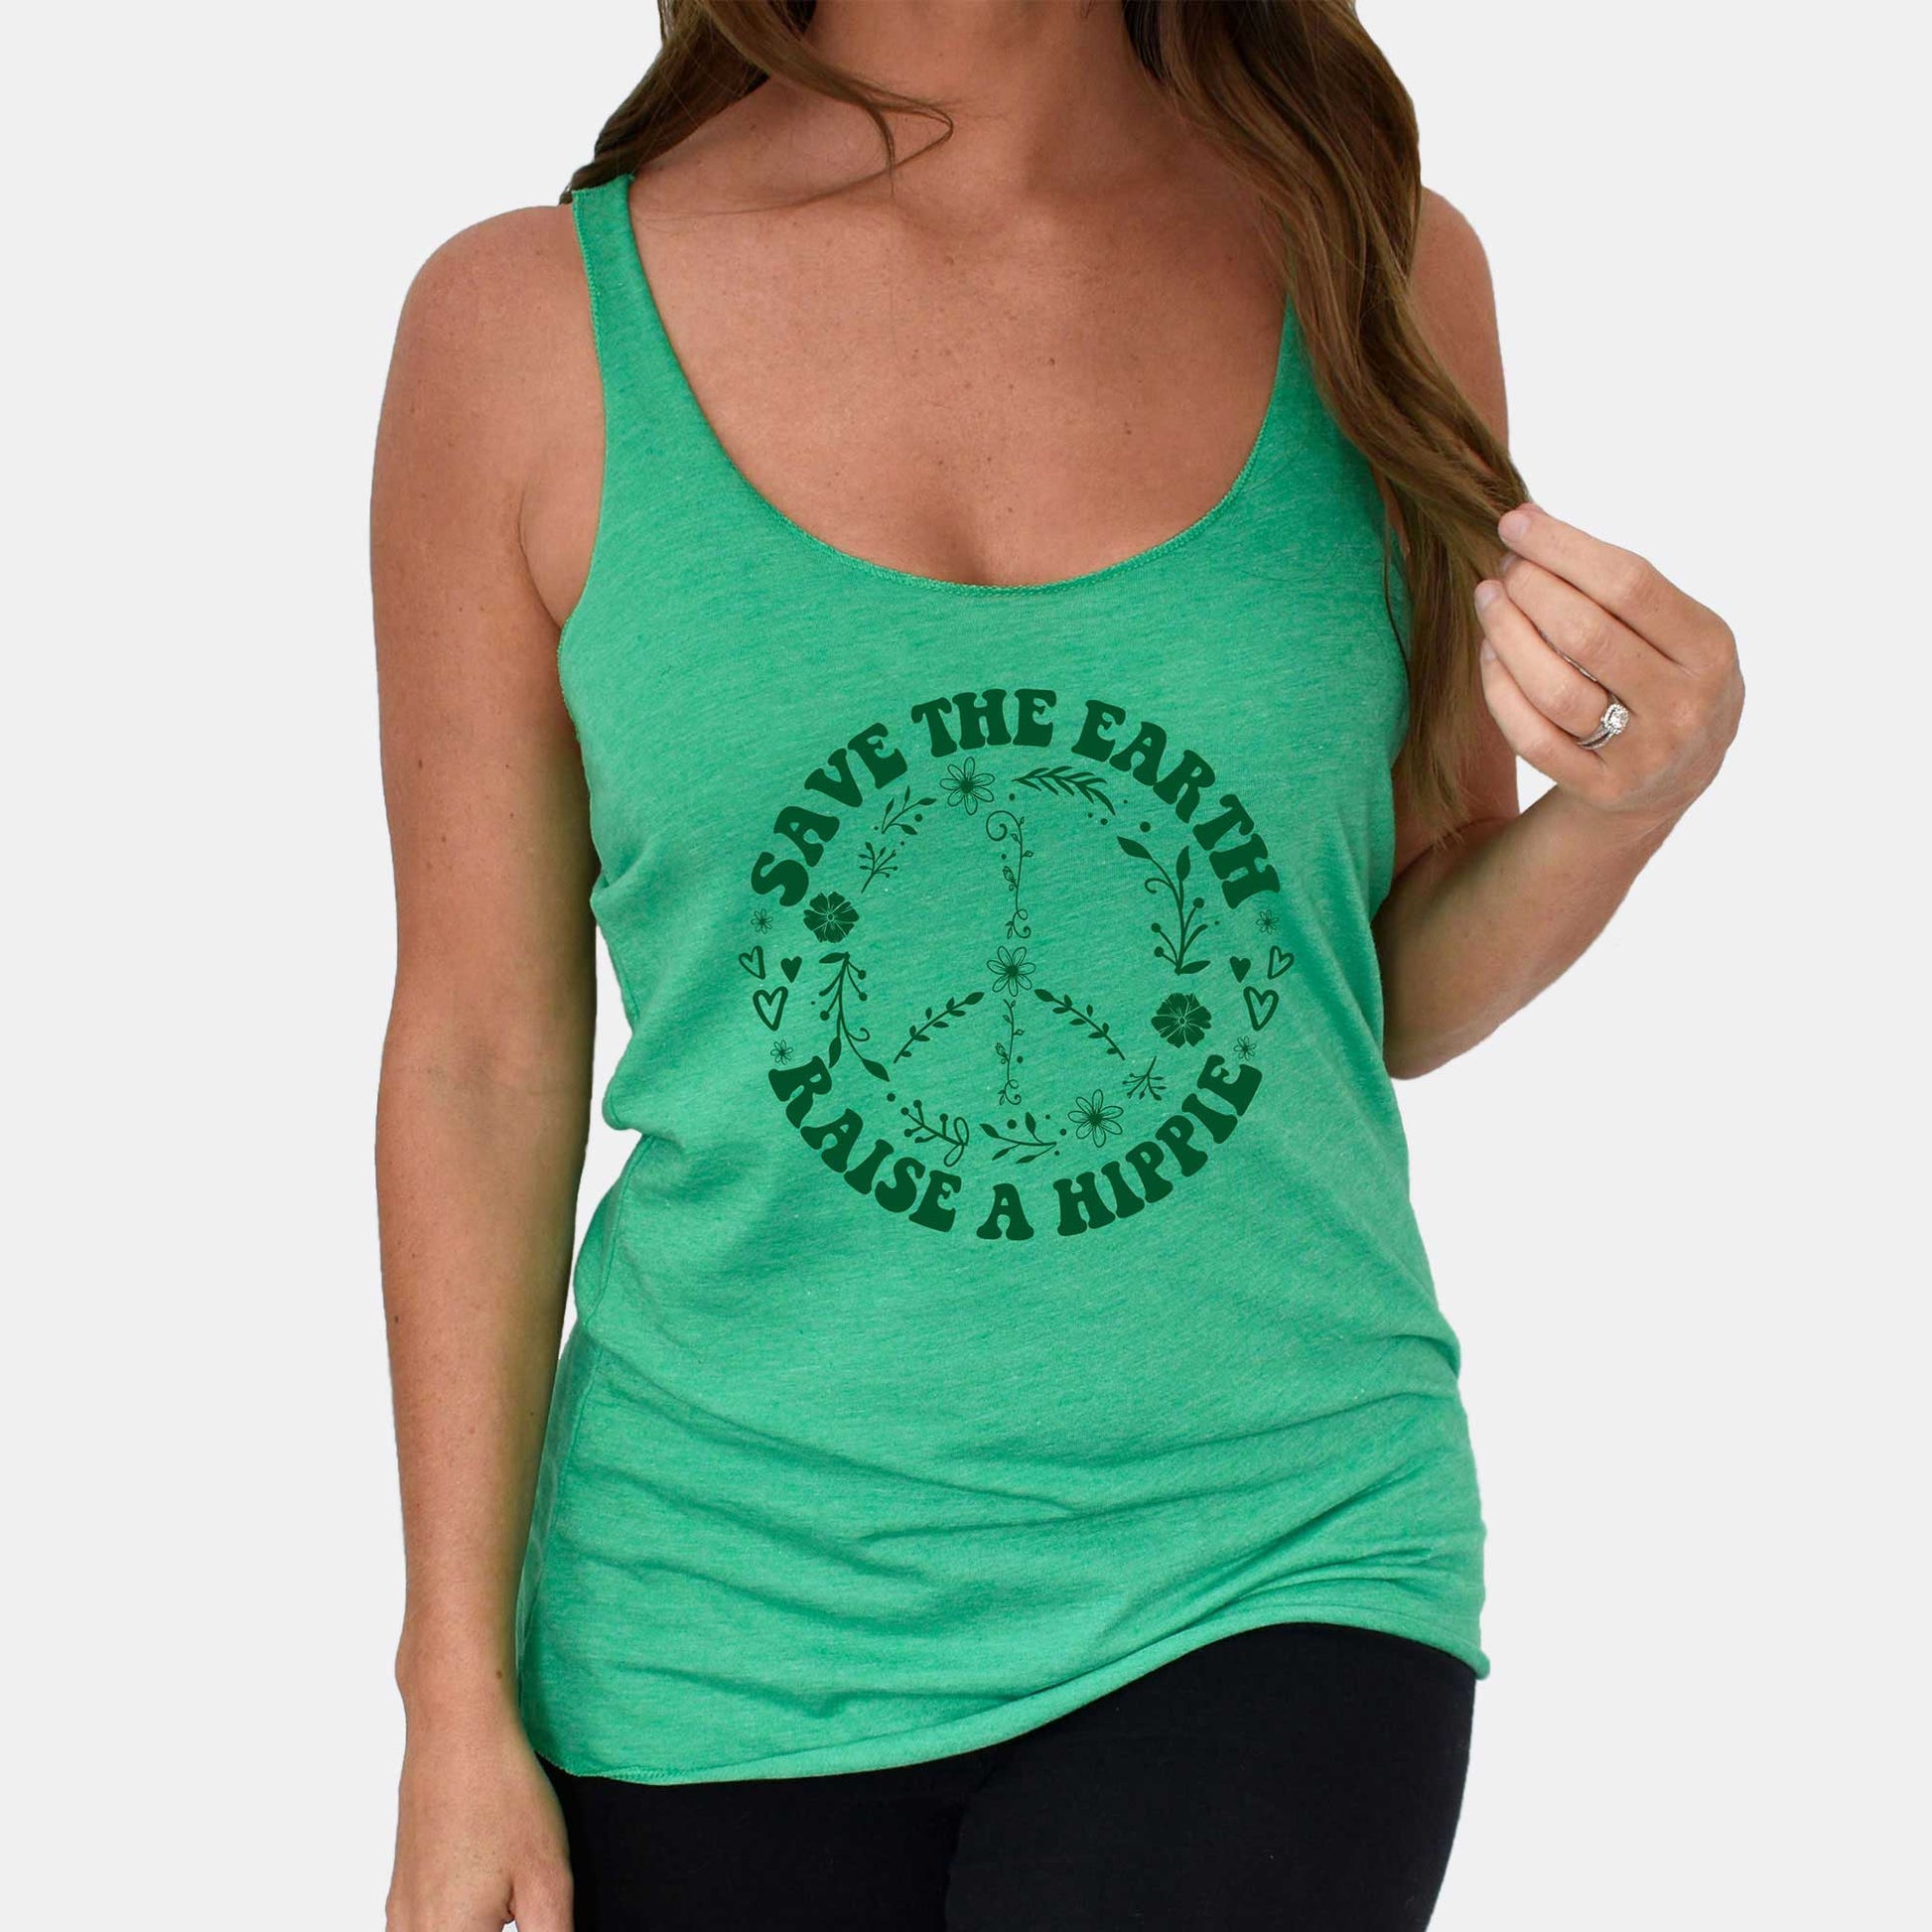 A woman wearing an envy green triblend Next Level racerback tank featuring a peace sign with the words save the earth raise a hippie.